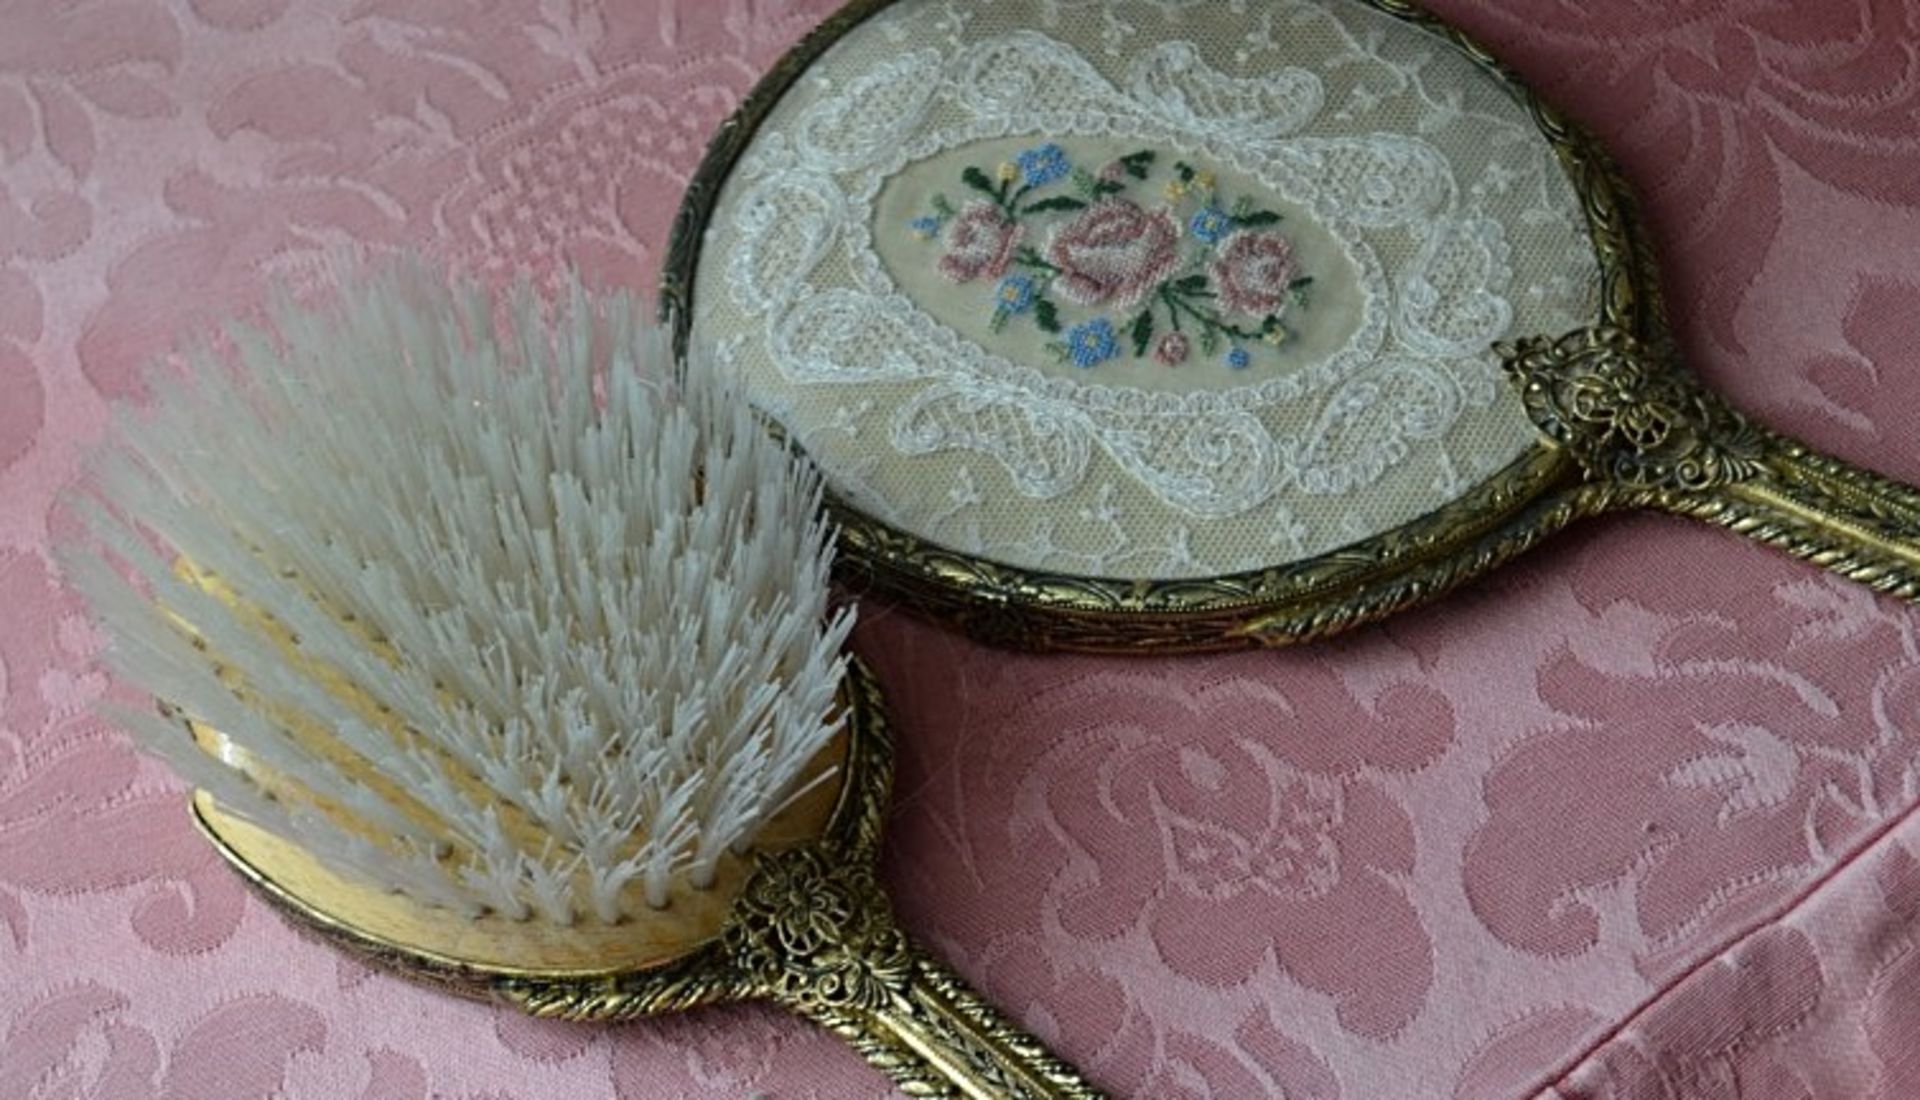 1 x Vintage 4-Piece Vanity Set With Brass Filigree Handles And Mounts - Circa 1950's - From A - Image 5 of 5